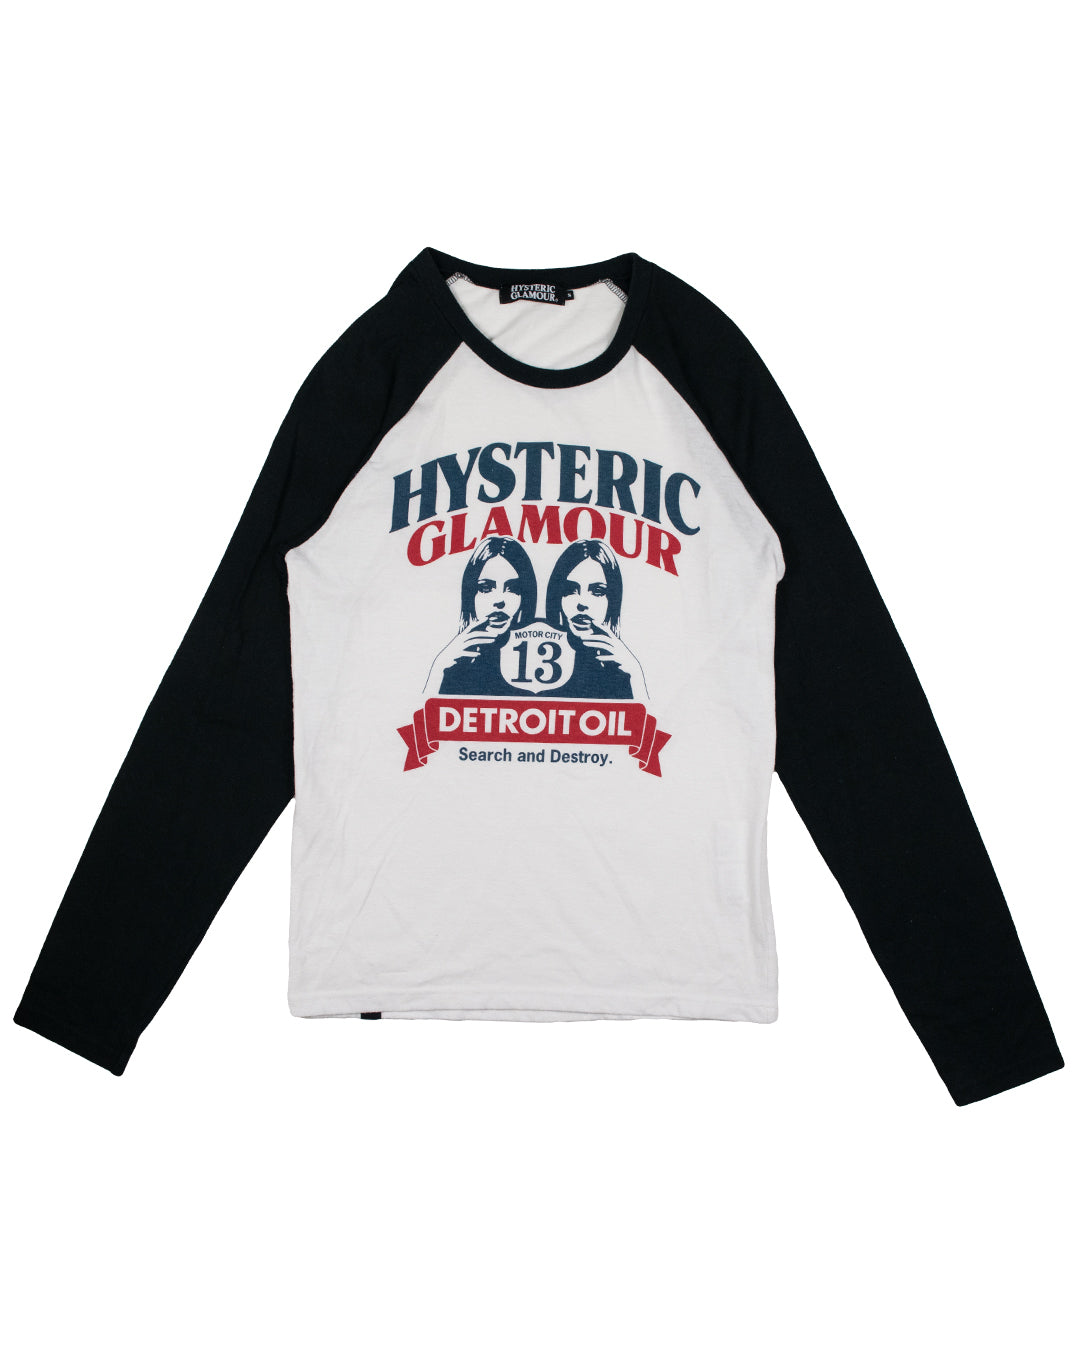 Hysteric Glamour Search and Destroy Raglan Long Sleeve Tee